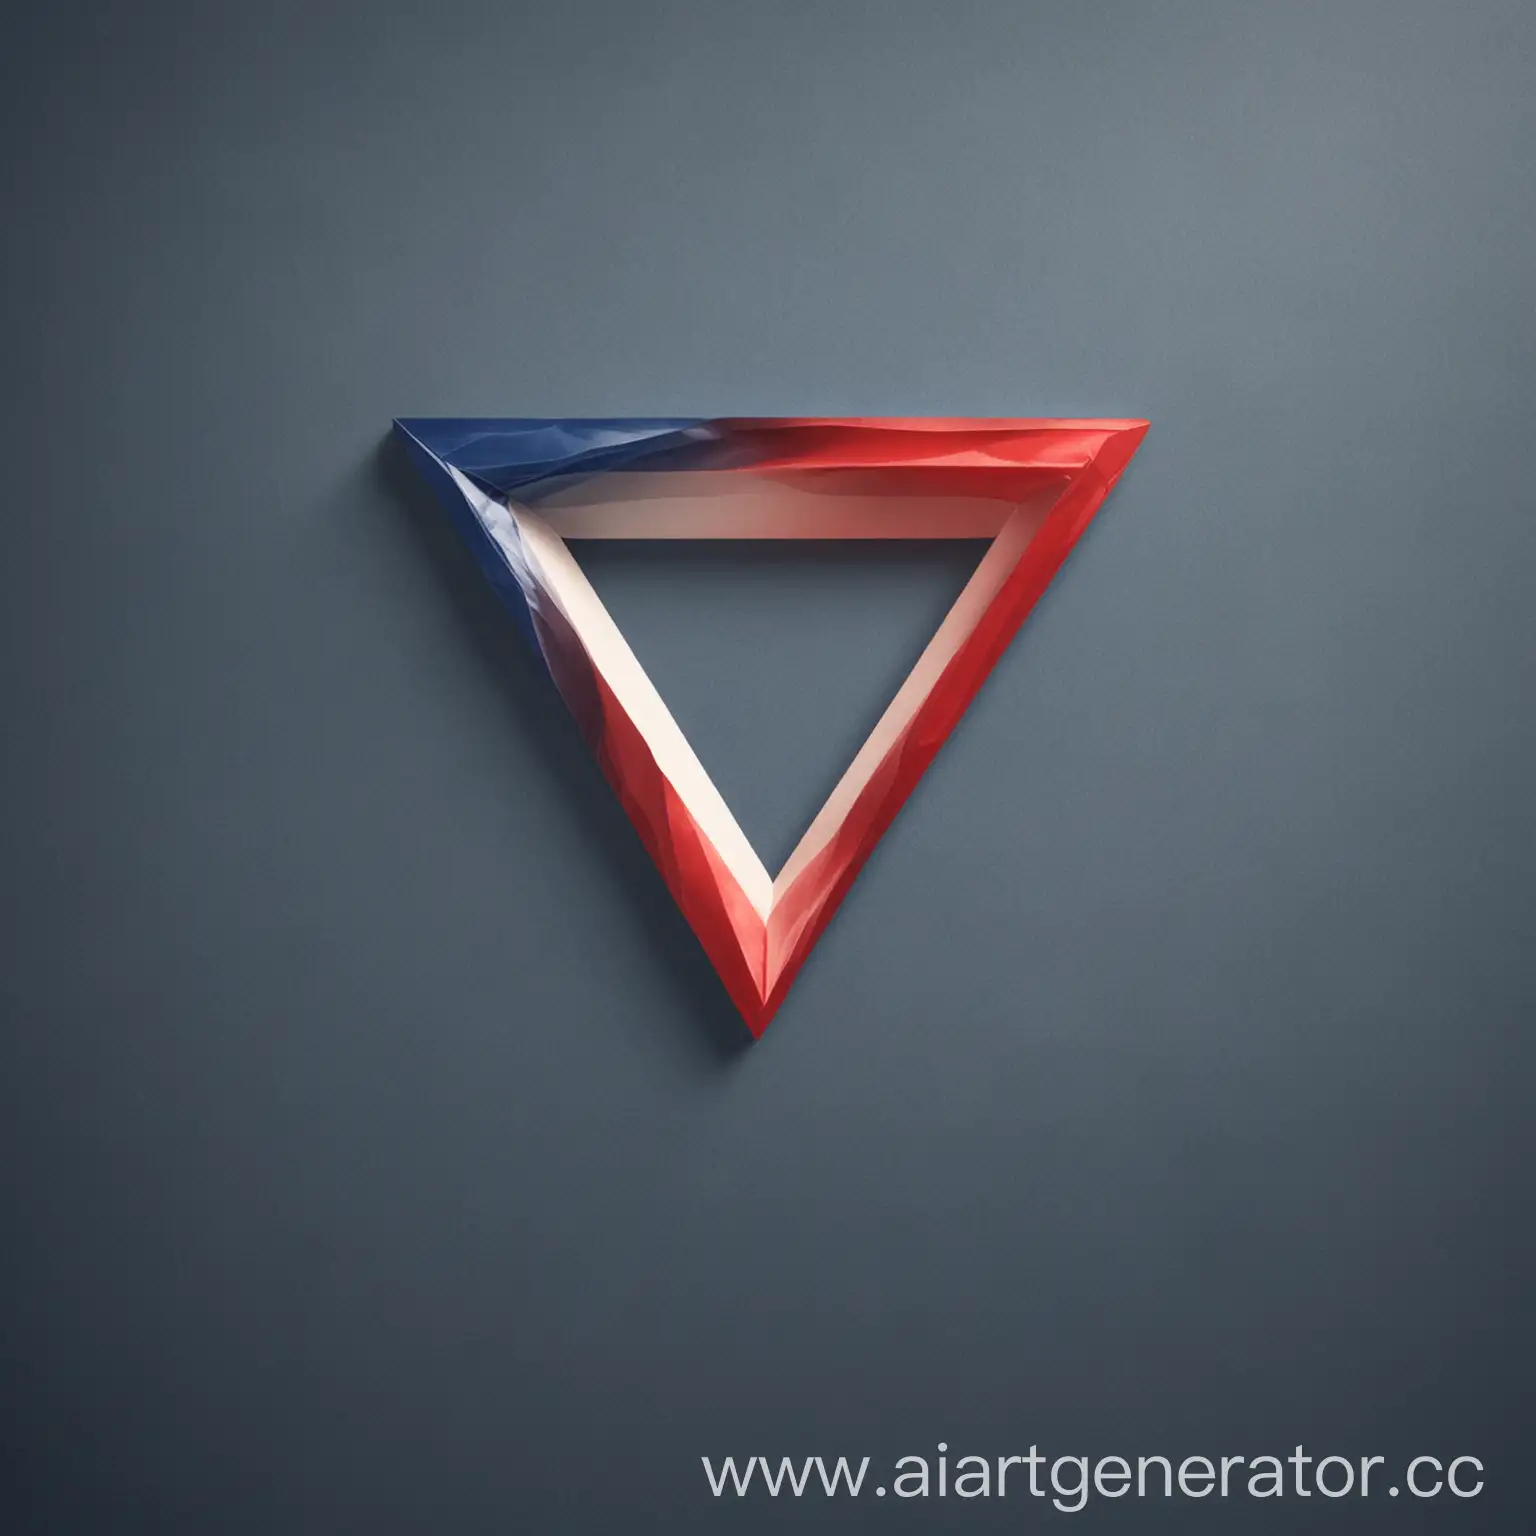 Triangle-Shape-English-Language-Study-App-Logo-Design-in-Red-White-and-Blue